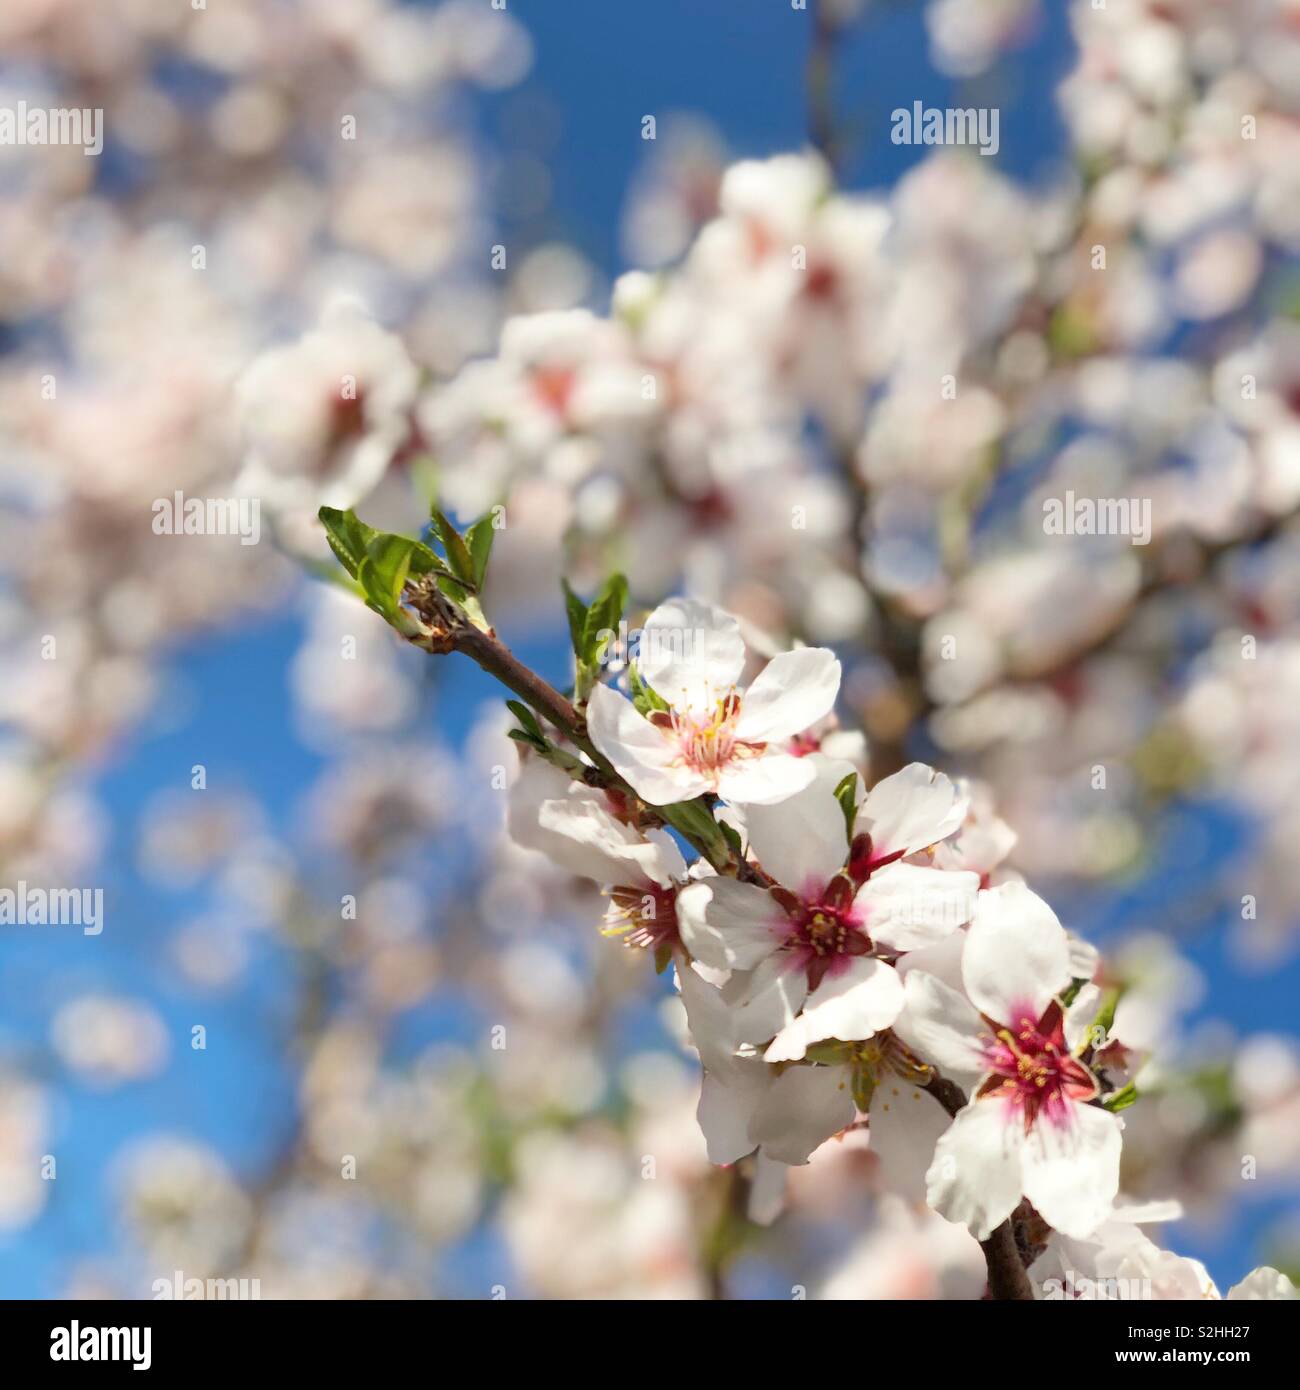 Almond tree in bloom Stock Photo